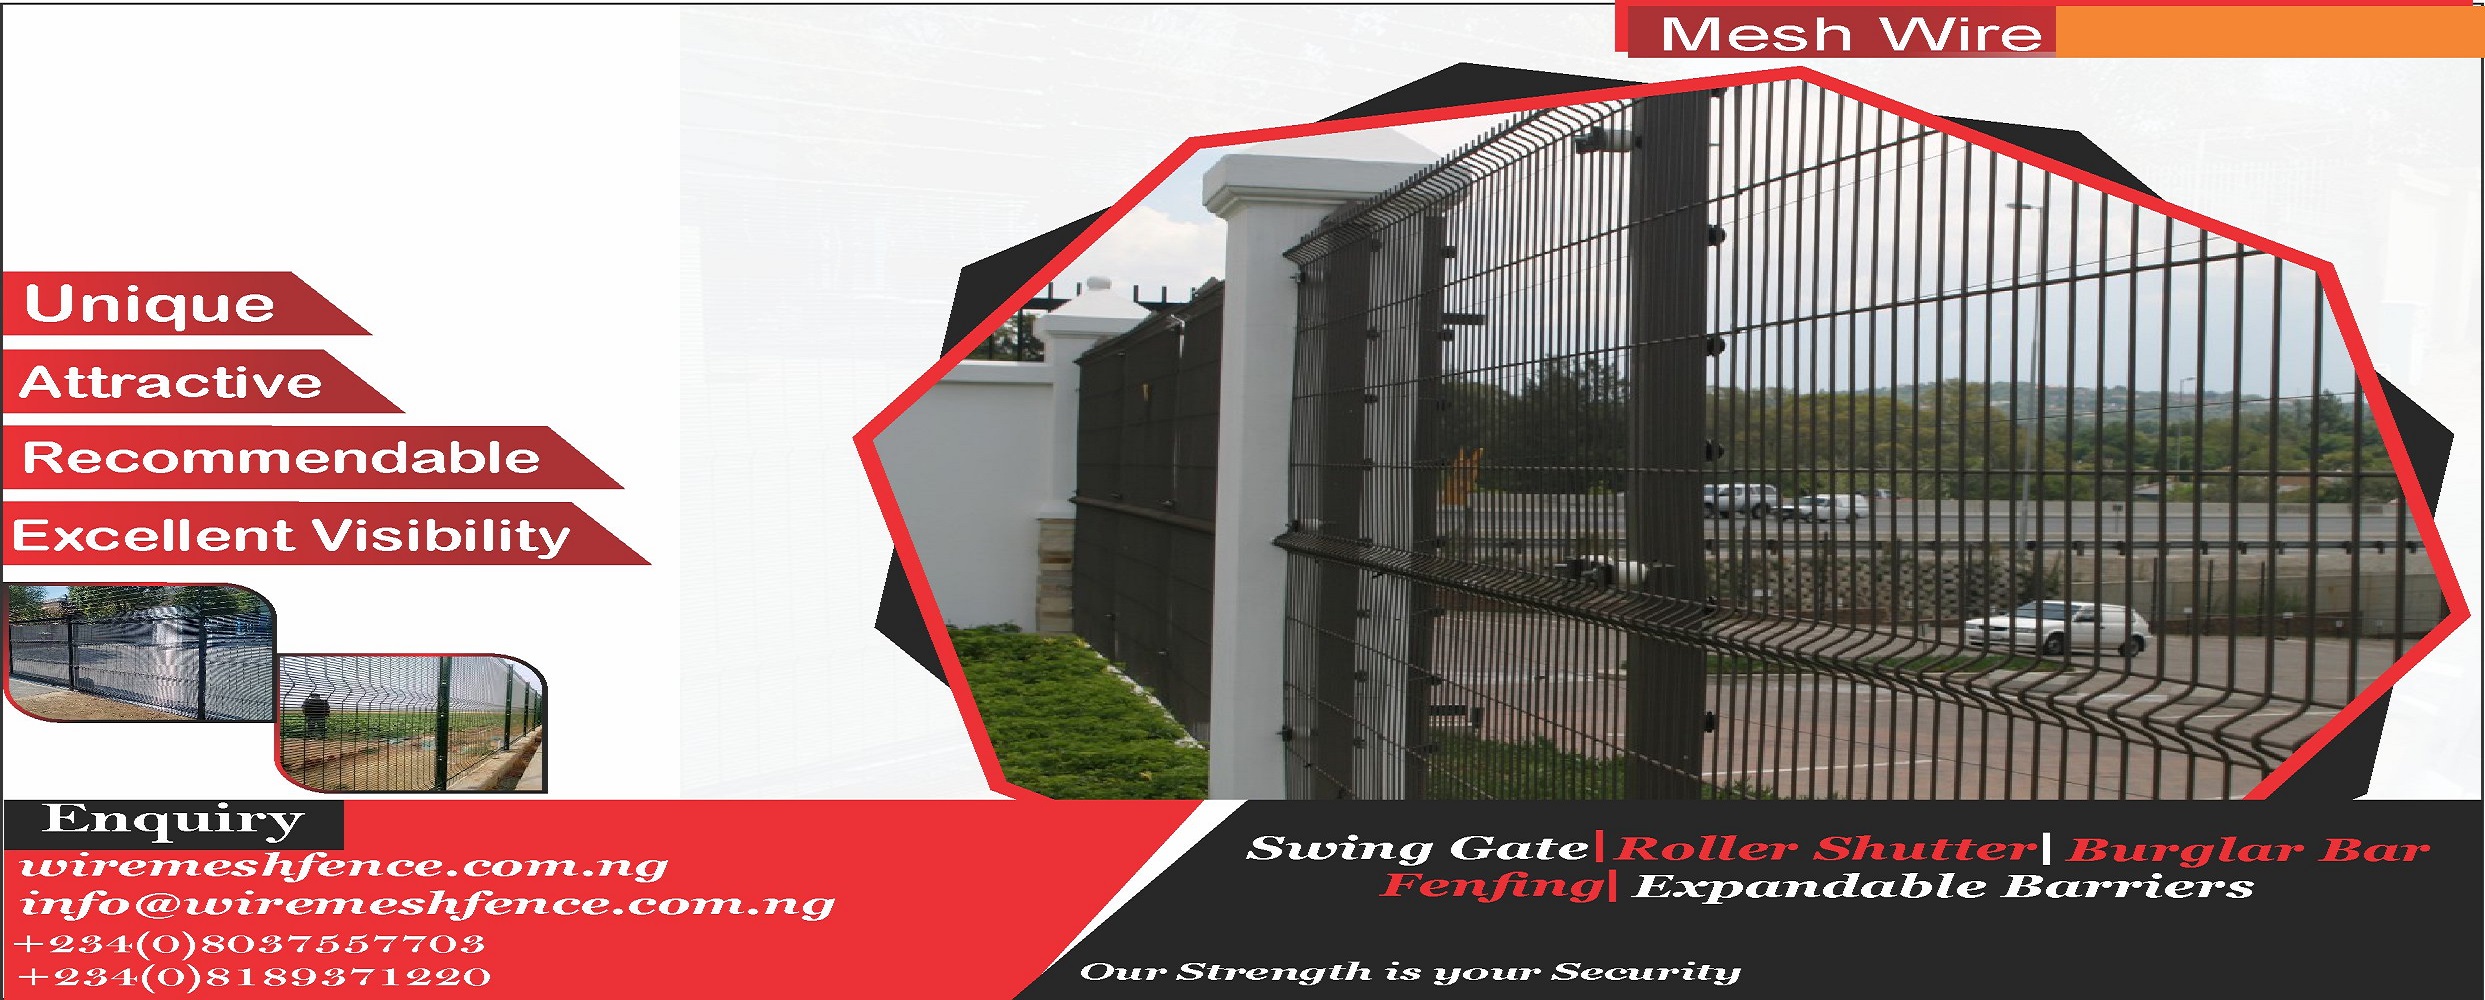 buy wire mesh fence in Nigeria